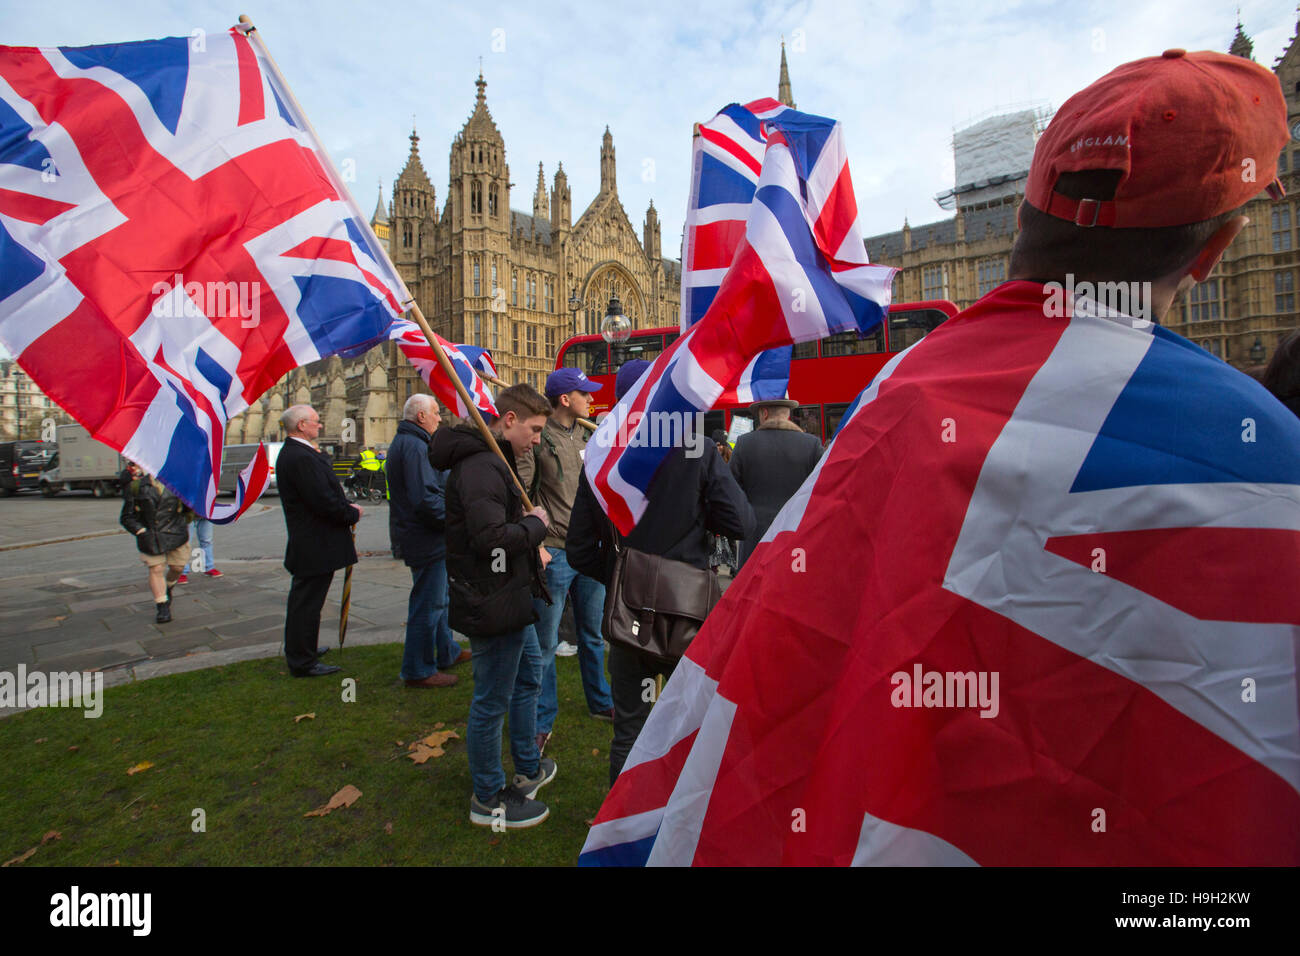 Westminster, London, UK. 23rd Nov, 2016. Pro-Brexit Supporters Protest outside Houses of Parliament, Westminster, UK Brexit supporters gather today at Parliament to stand up for the democracy of the Brexit Vote after 5 months of the 23rd June EU Referendum across the United KIngdom. Credit:  Jeff Gilbert/Alamy Live News Stock Photo